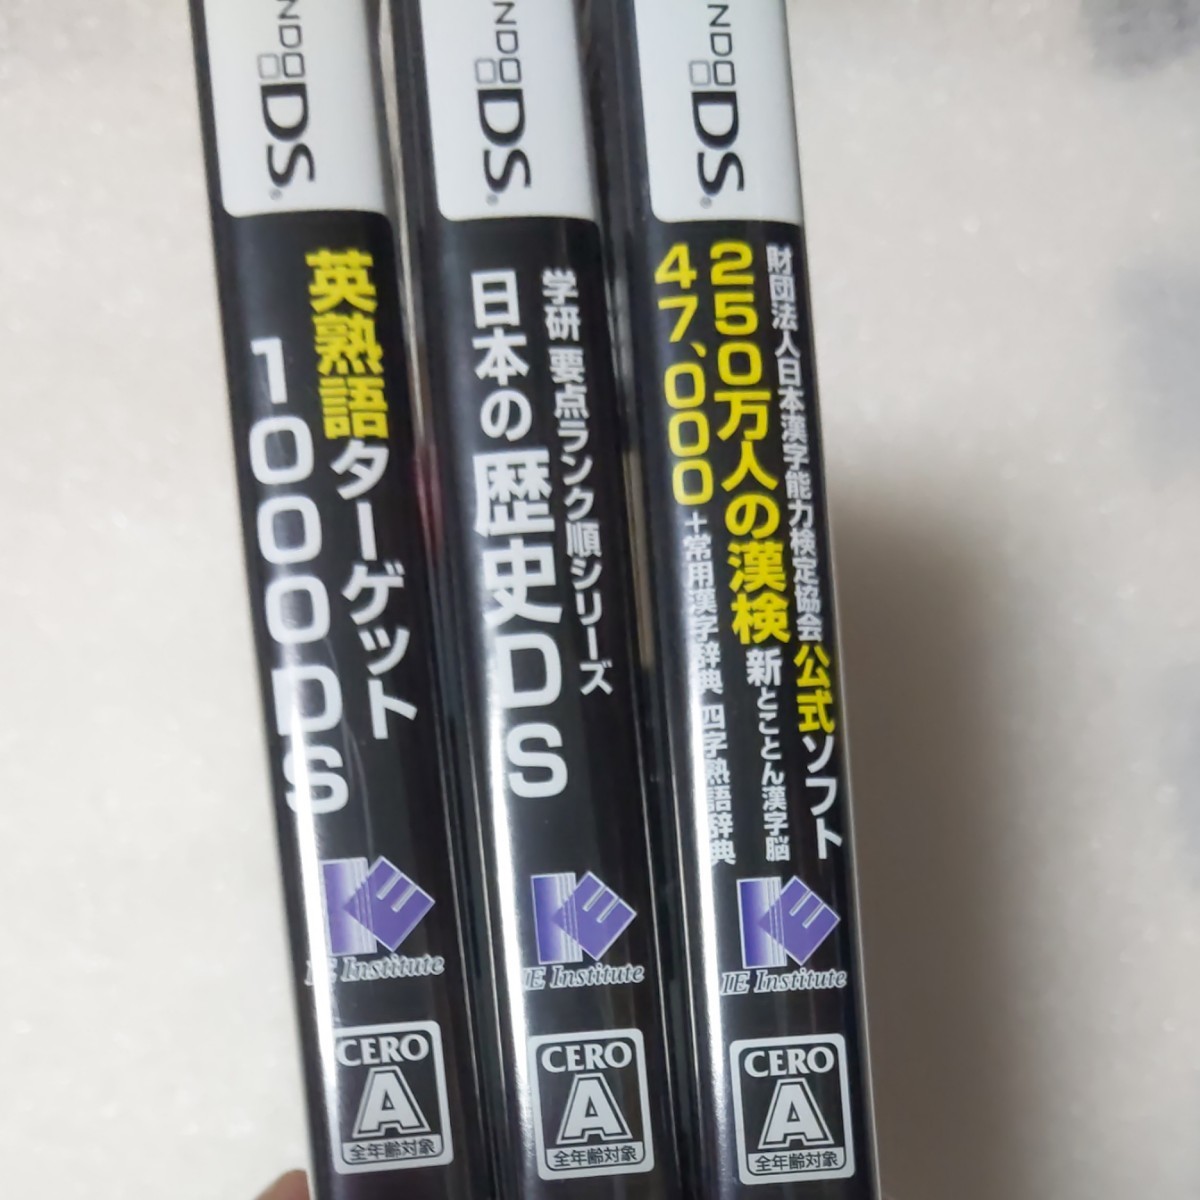 DSソフト 学習ソフト3本セット販売